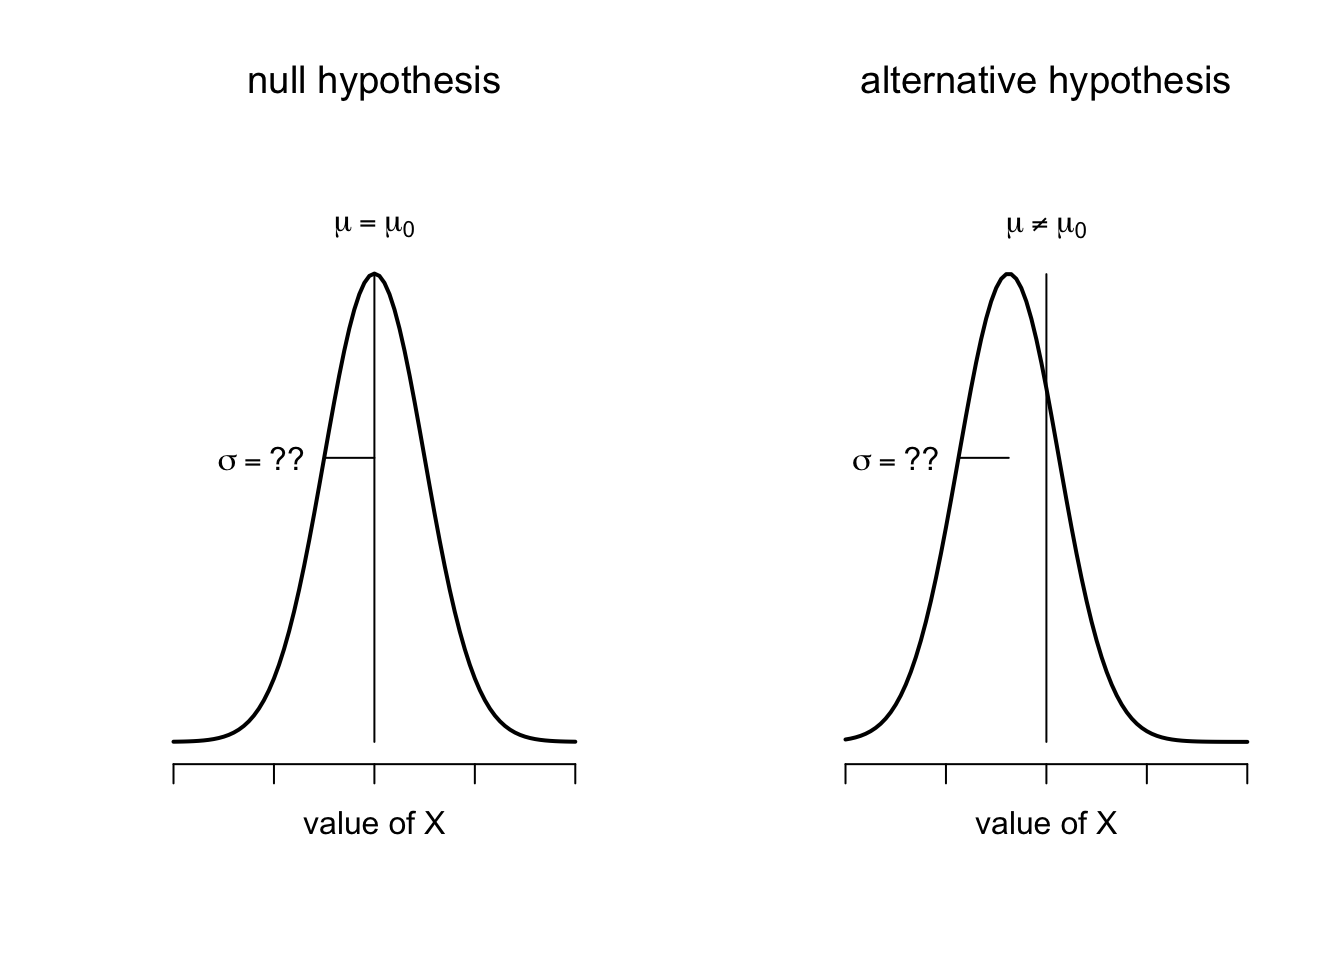 Graphical illustration of the null and alternative hypotheses assumed by the (two sided) one sample $t$-test. Note the similarity to the $z$-test. The null hypothesis is that the population mean $\mu$ is equal to some specified value $\mu_0$, and the alternative hypothesis is that it is not. Like the $z$-test, we assume that the data are normally distributed; but we do not assume that the population standard deviation $\sigma$ is known in advance.